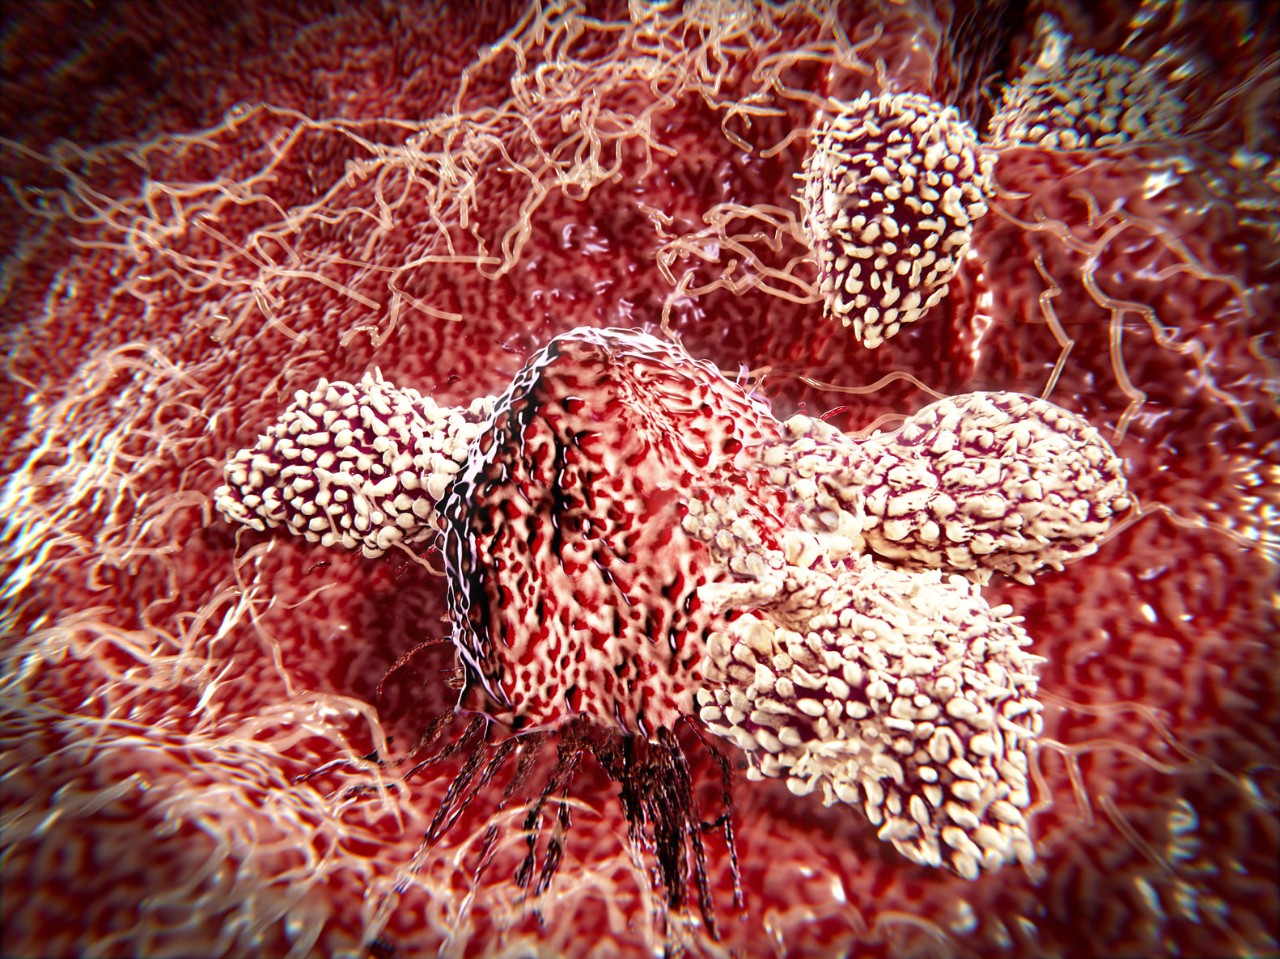 Natural killer (NK) cells first earned their title as “killers” nearly 40 years ago when researchers observed the rapid immune response of these lymphocytes as they destroyed host cells infected with a virus or tumor cells. It seemed that NK cells could attach spontaneously without prior activation. 